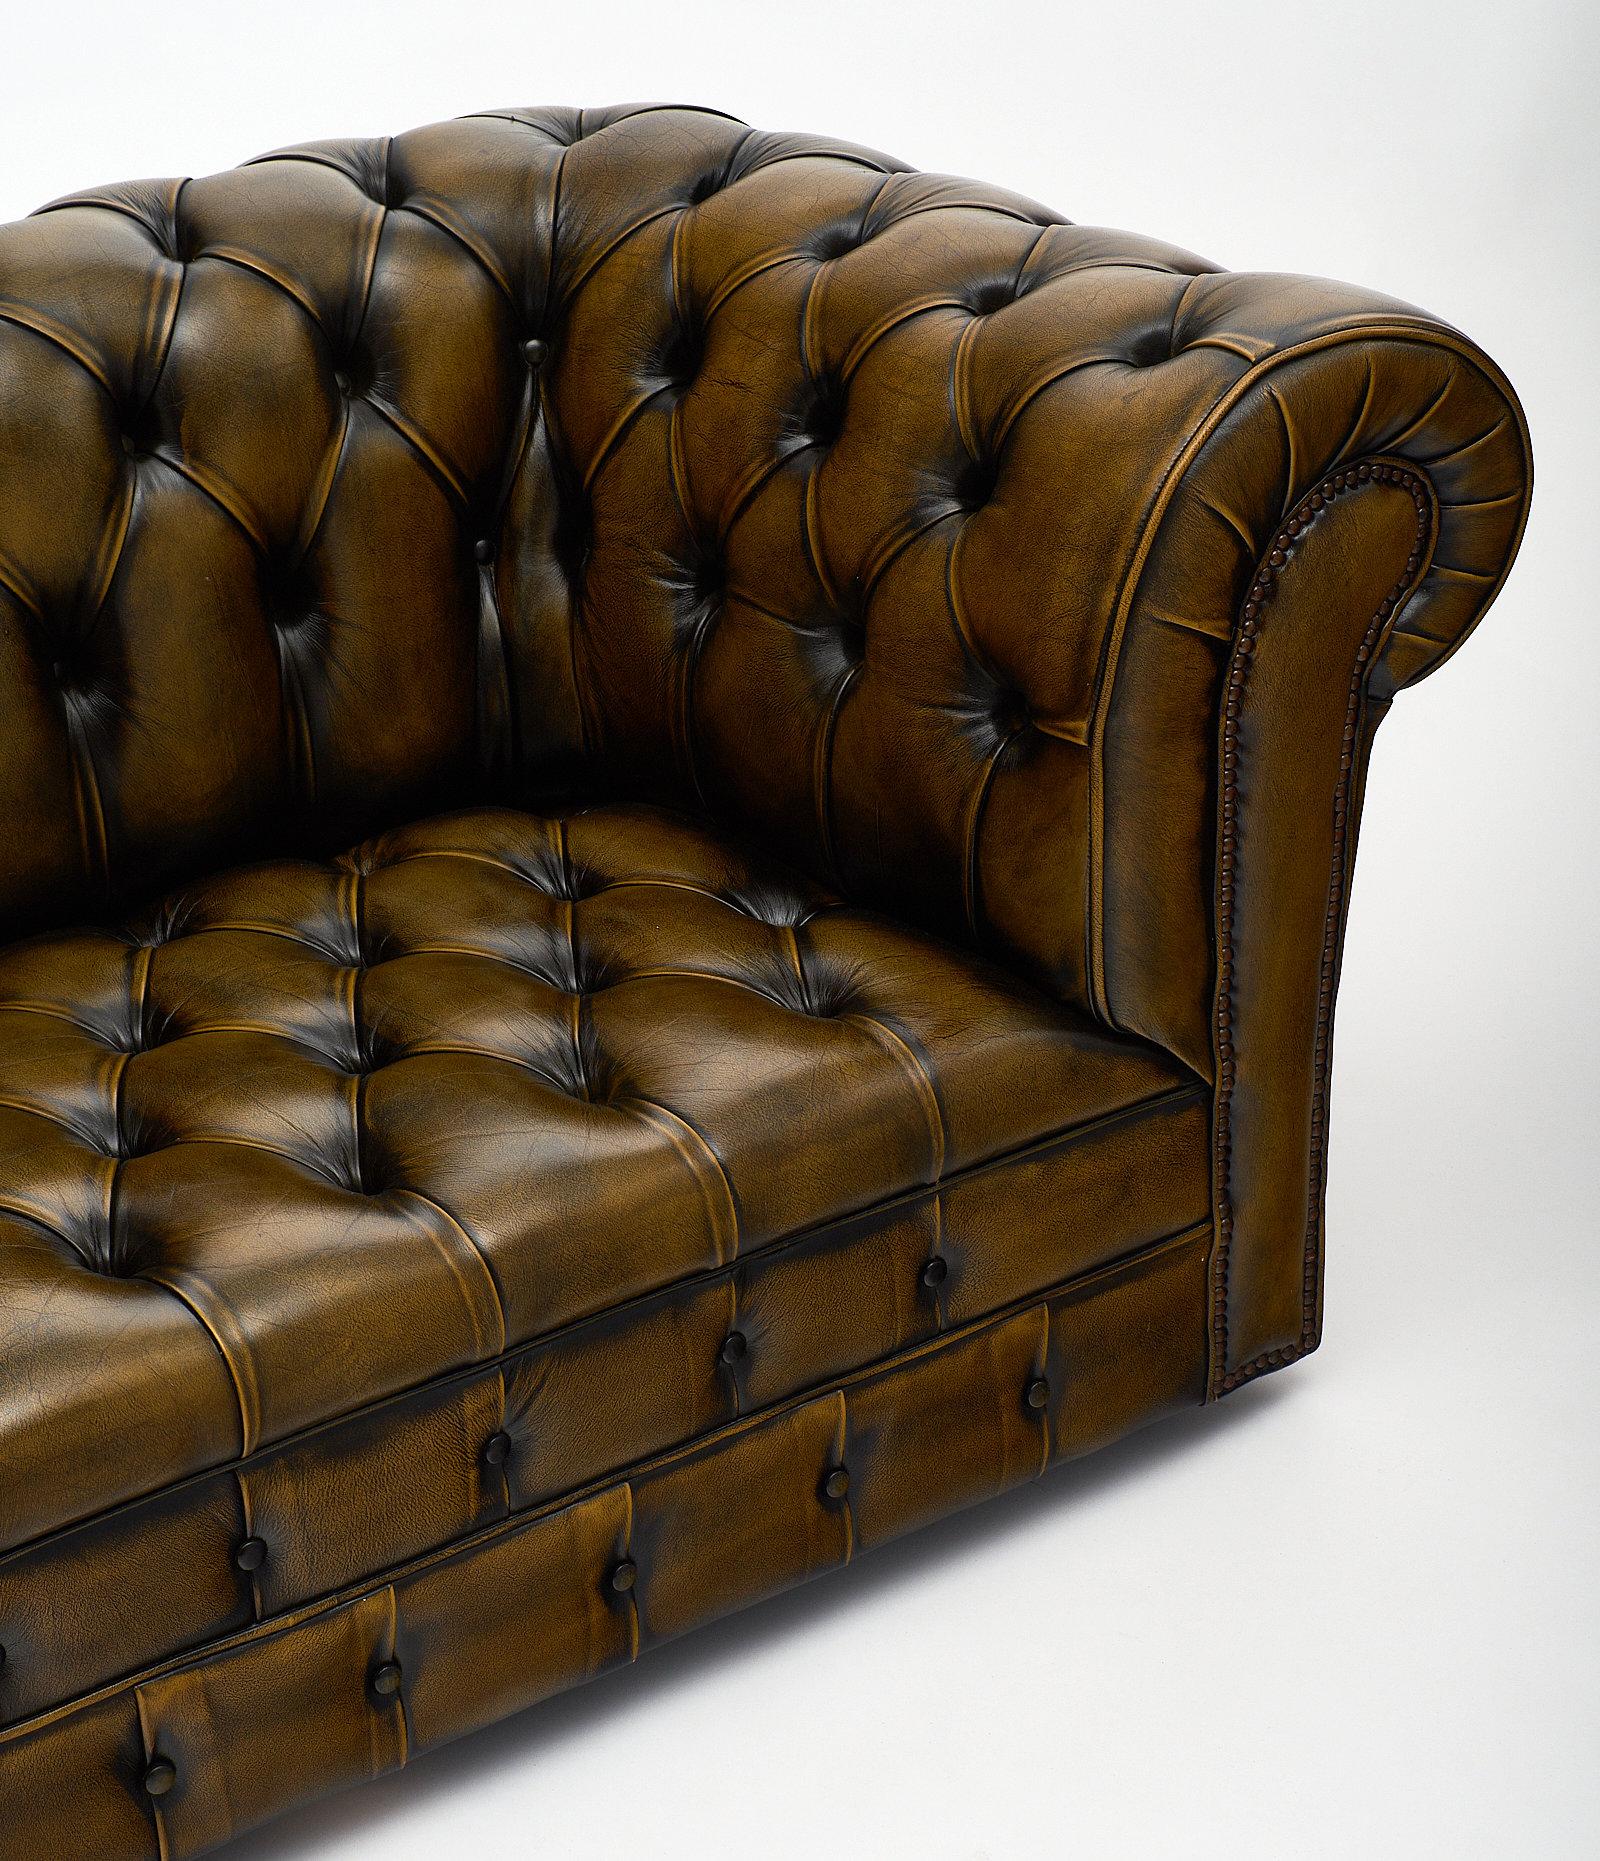 Leather Vintage English Chesterfield Sofa 2